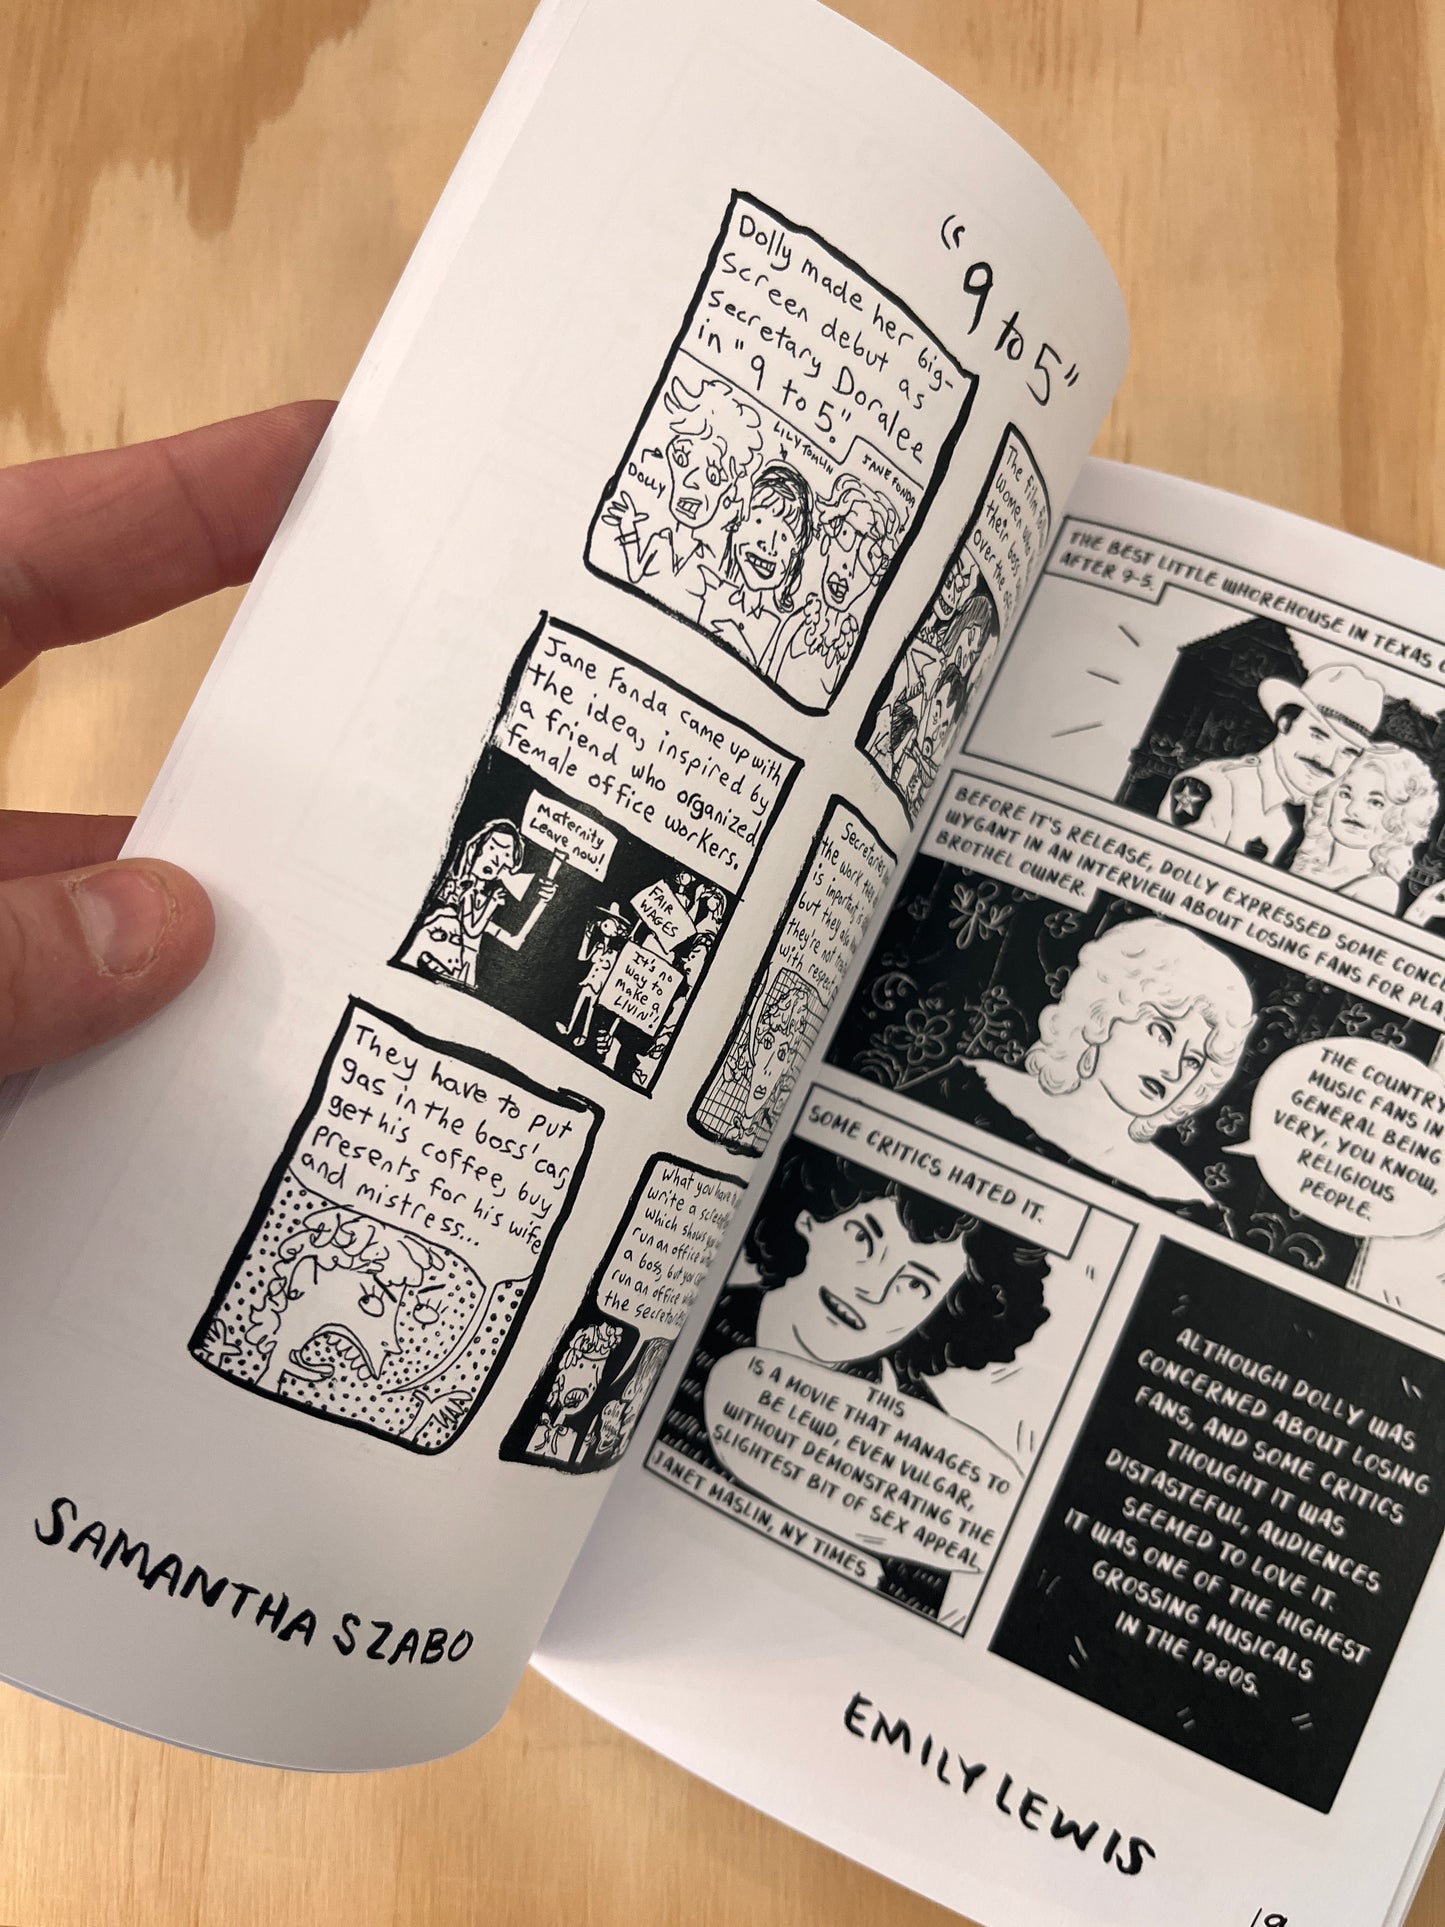 Dolly Pardon: A Short, Tangential, Unauthorized Dolly Parton Biography in Comics